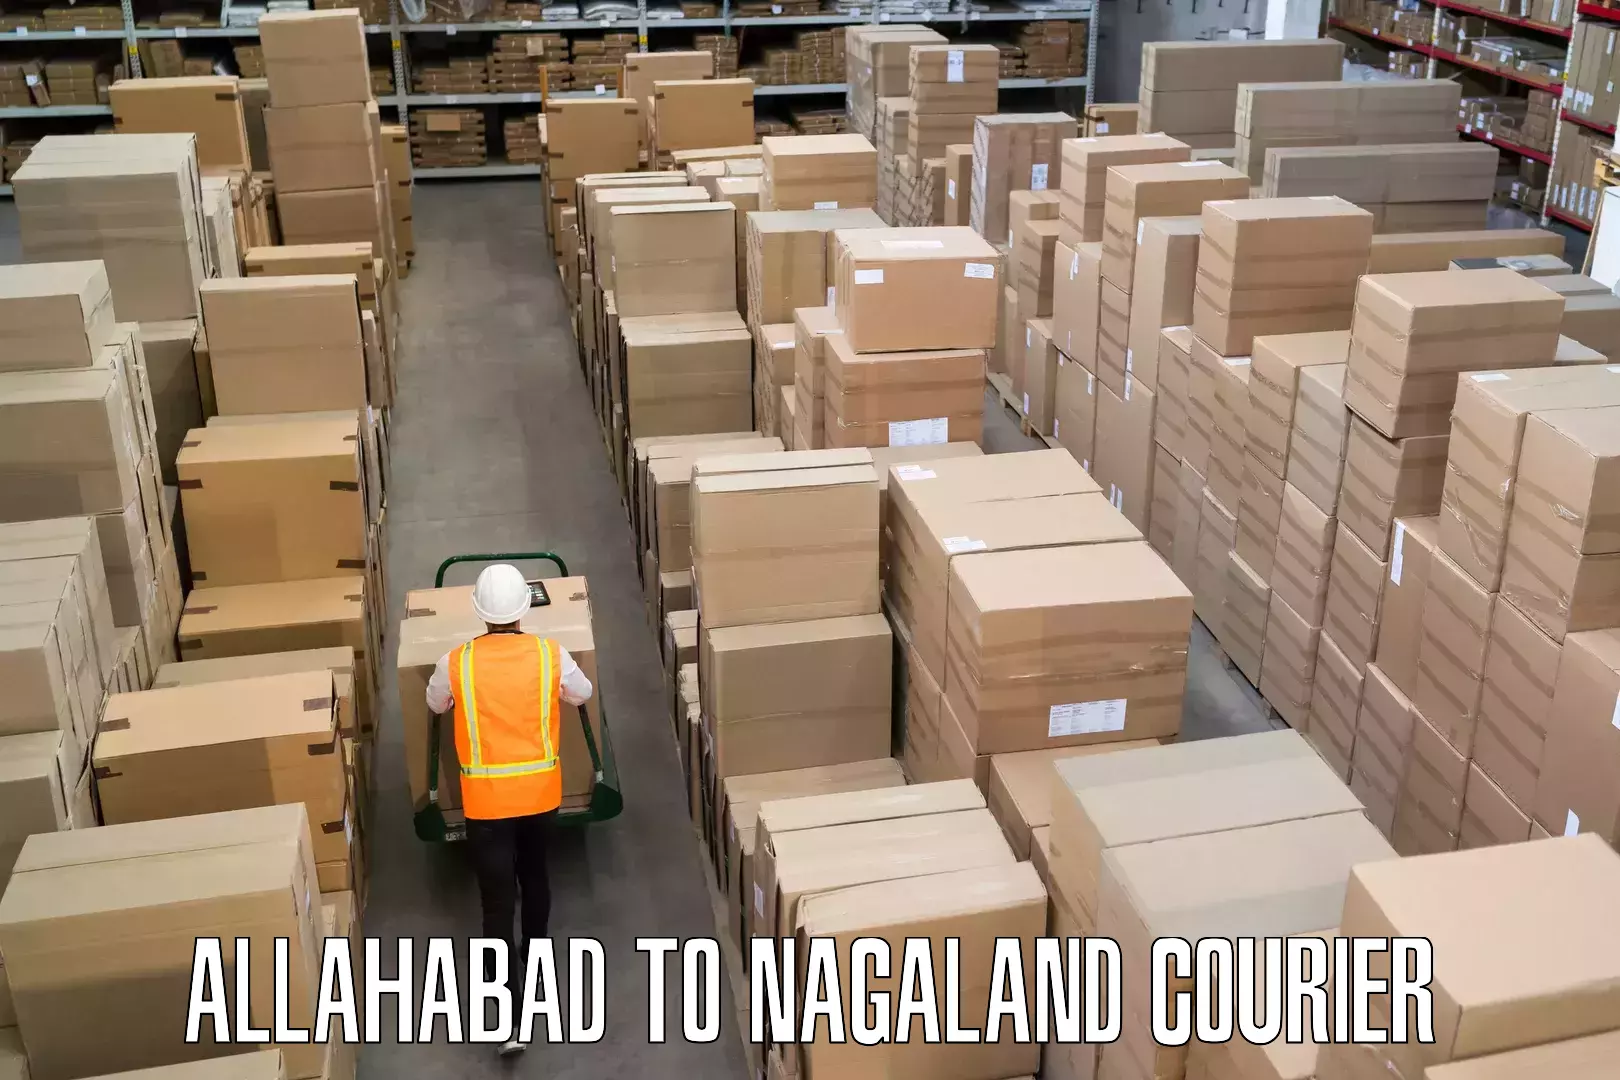 Luggage delivery app Allahabad to Nagaland